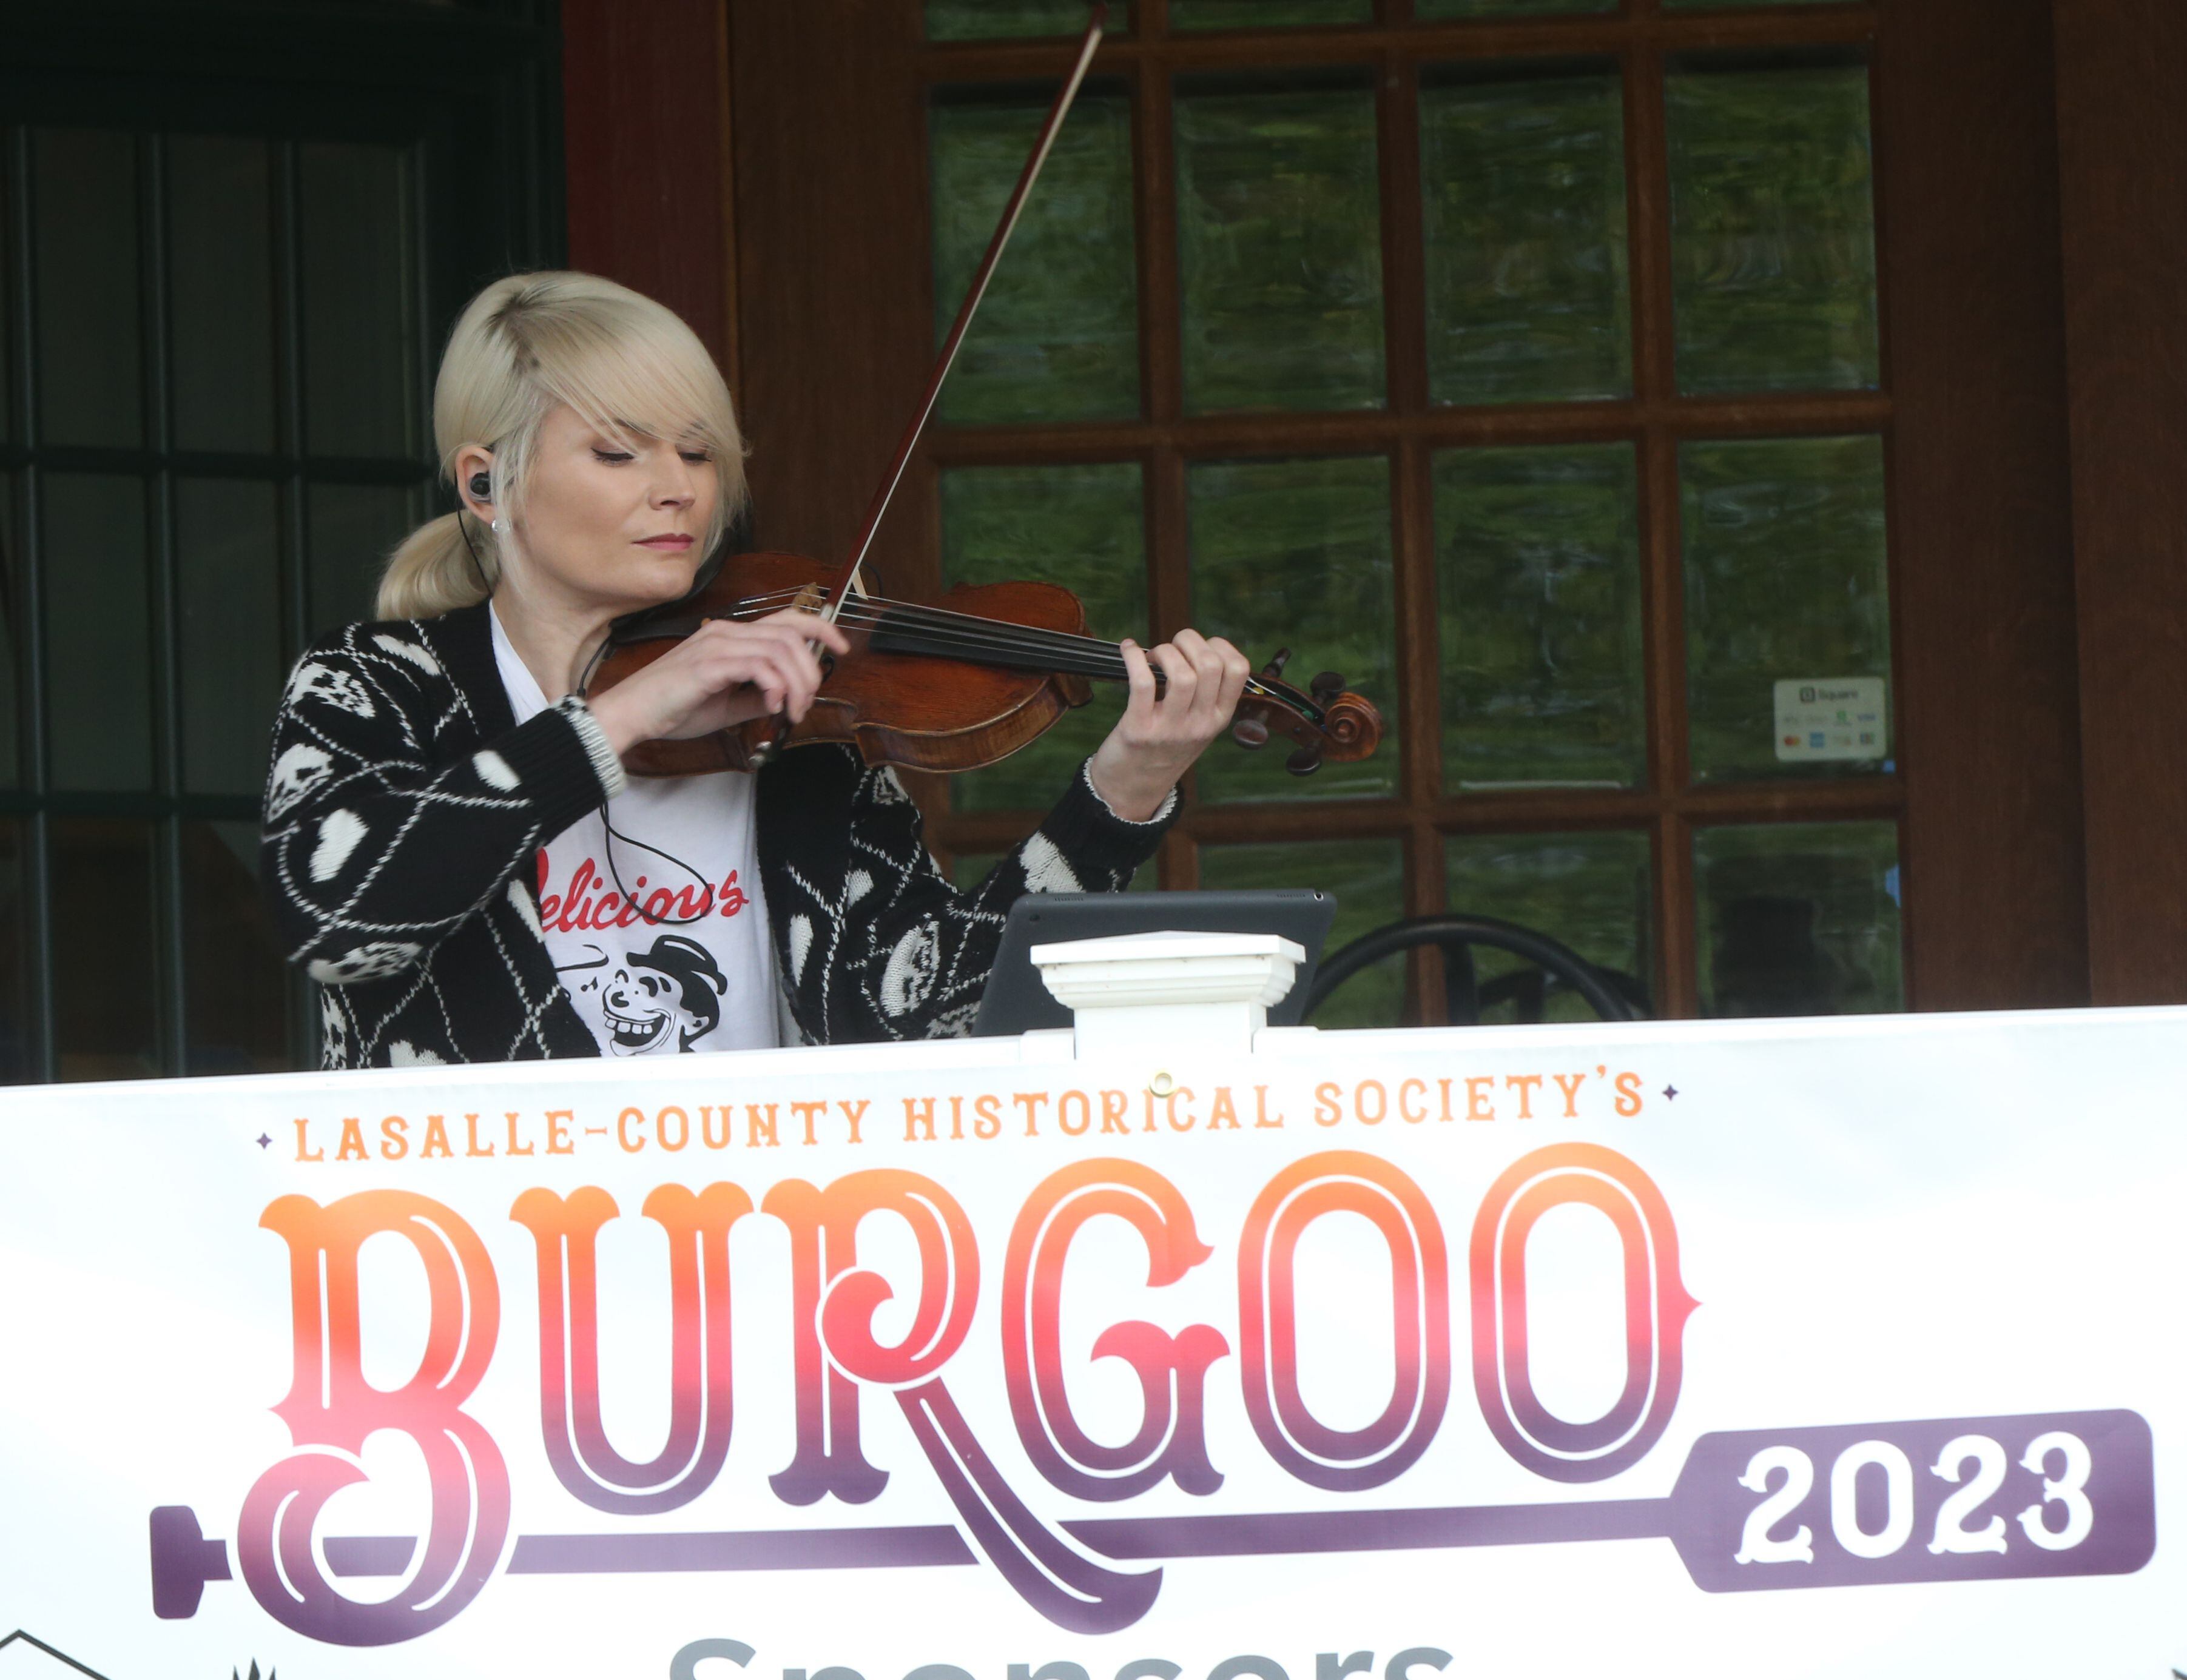 Casey McGrath violinist, plays music on the front porch of the La Salle County Historical Society Canal Market during the 53rd annual Burgoo on Sunday, Oct. 8, 2023 downtown Utica.